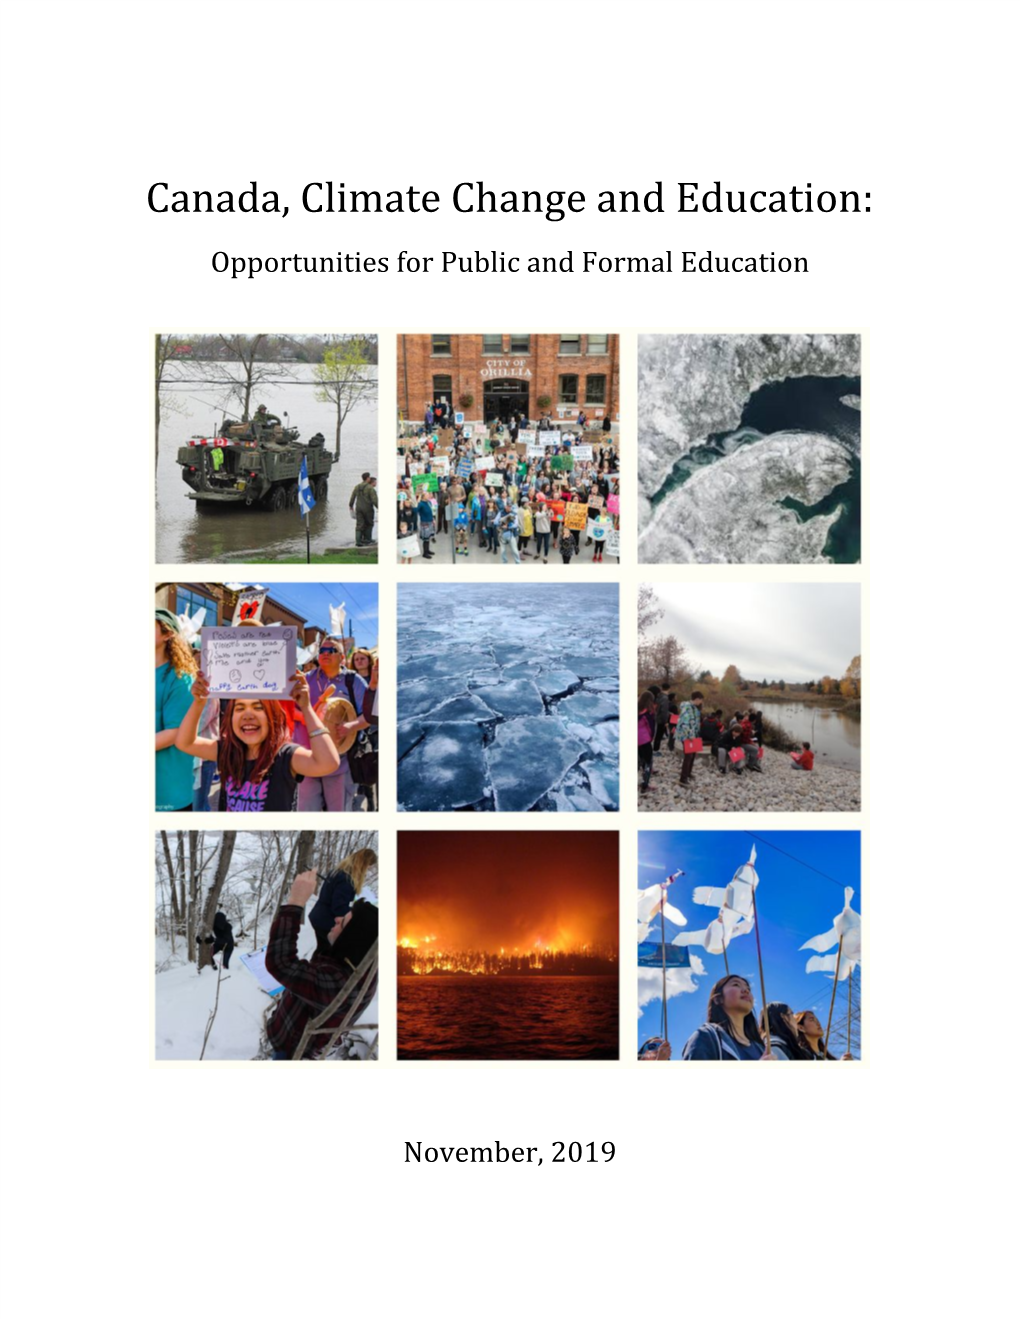 Canada, Climate Change and Education: Opportunities for Public and Formal Education